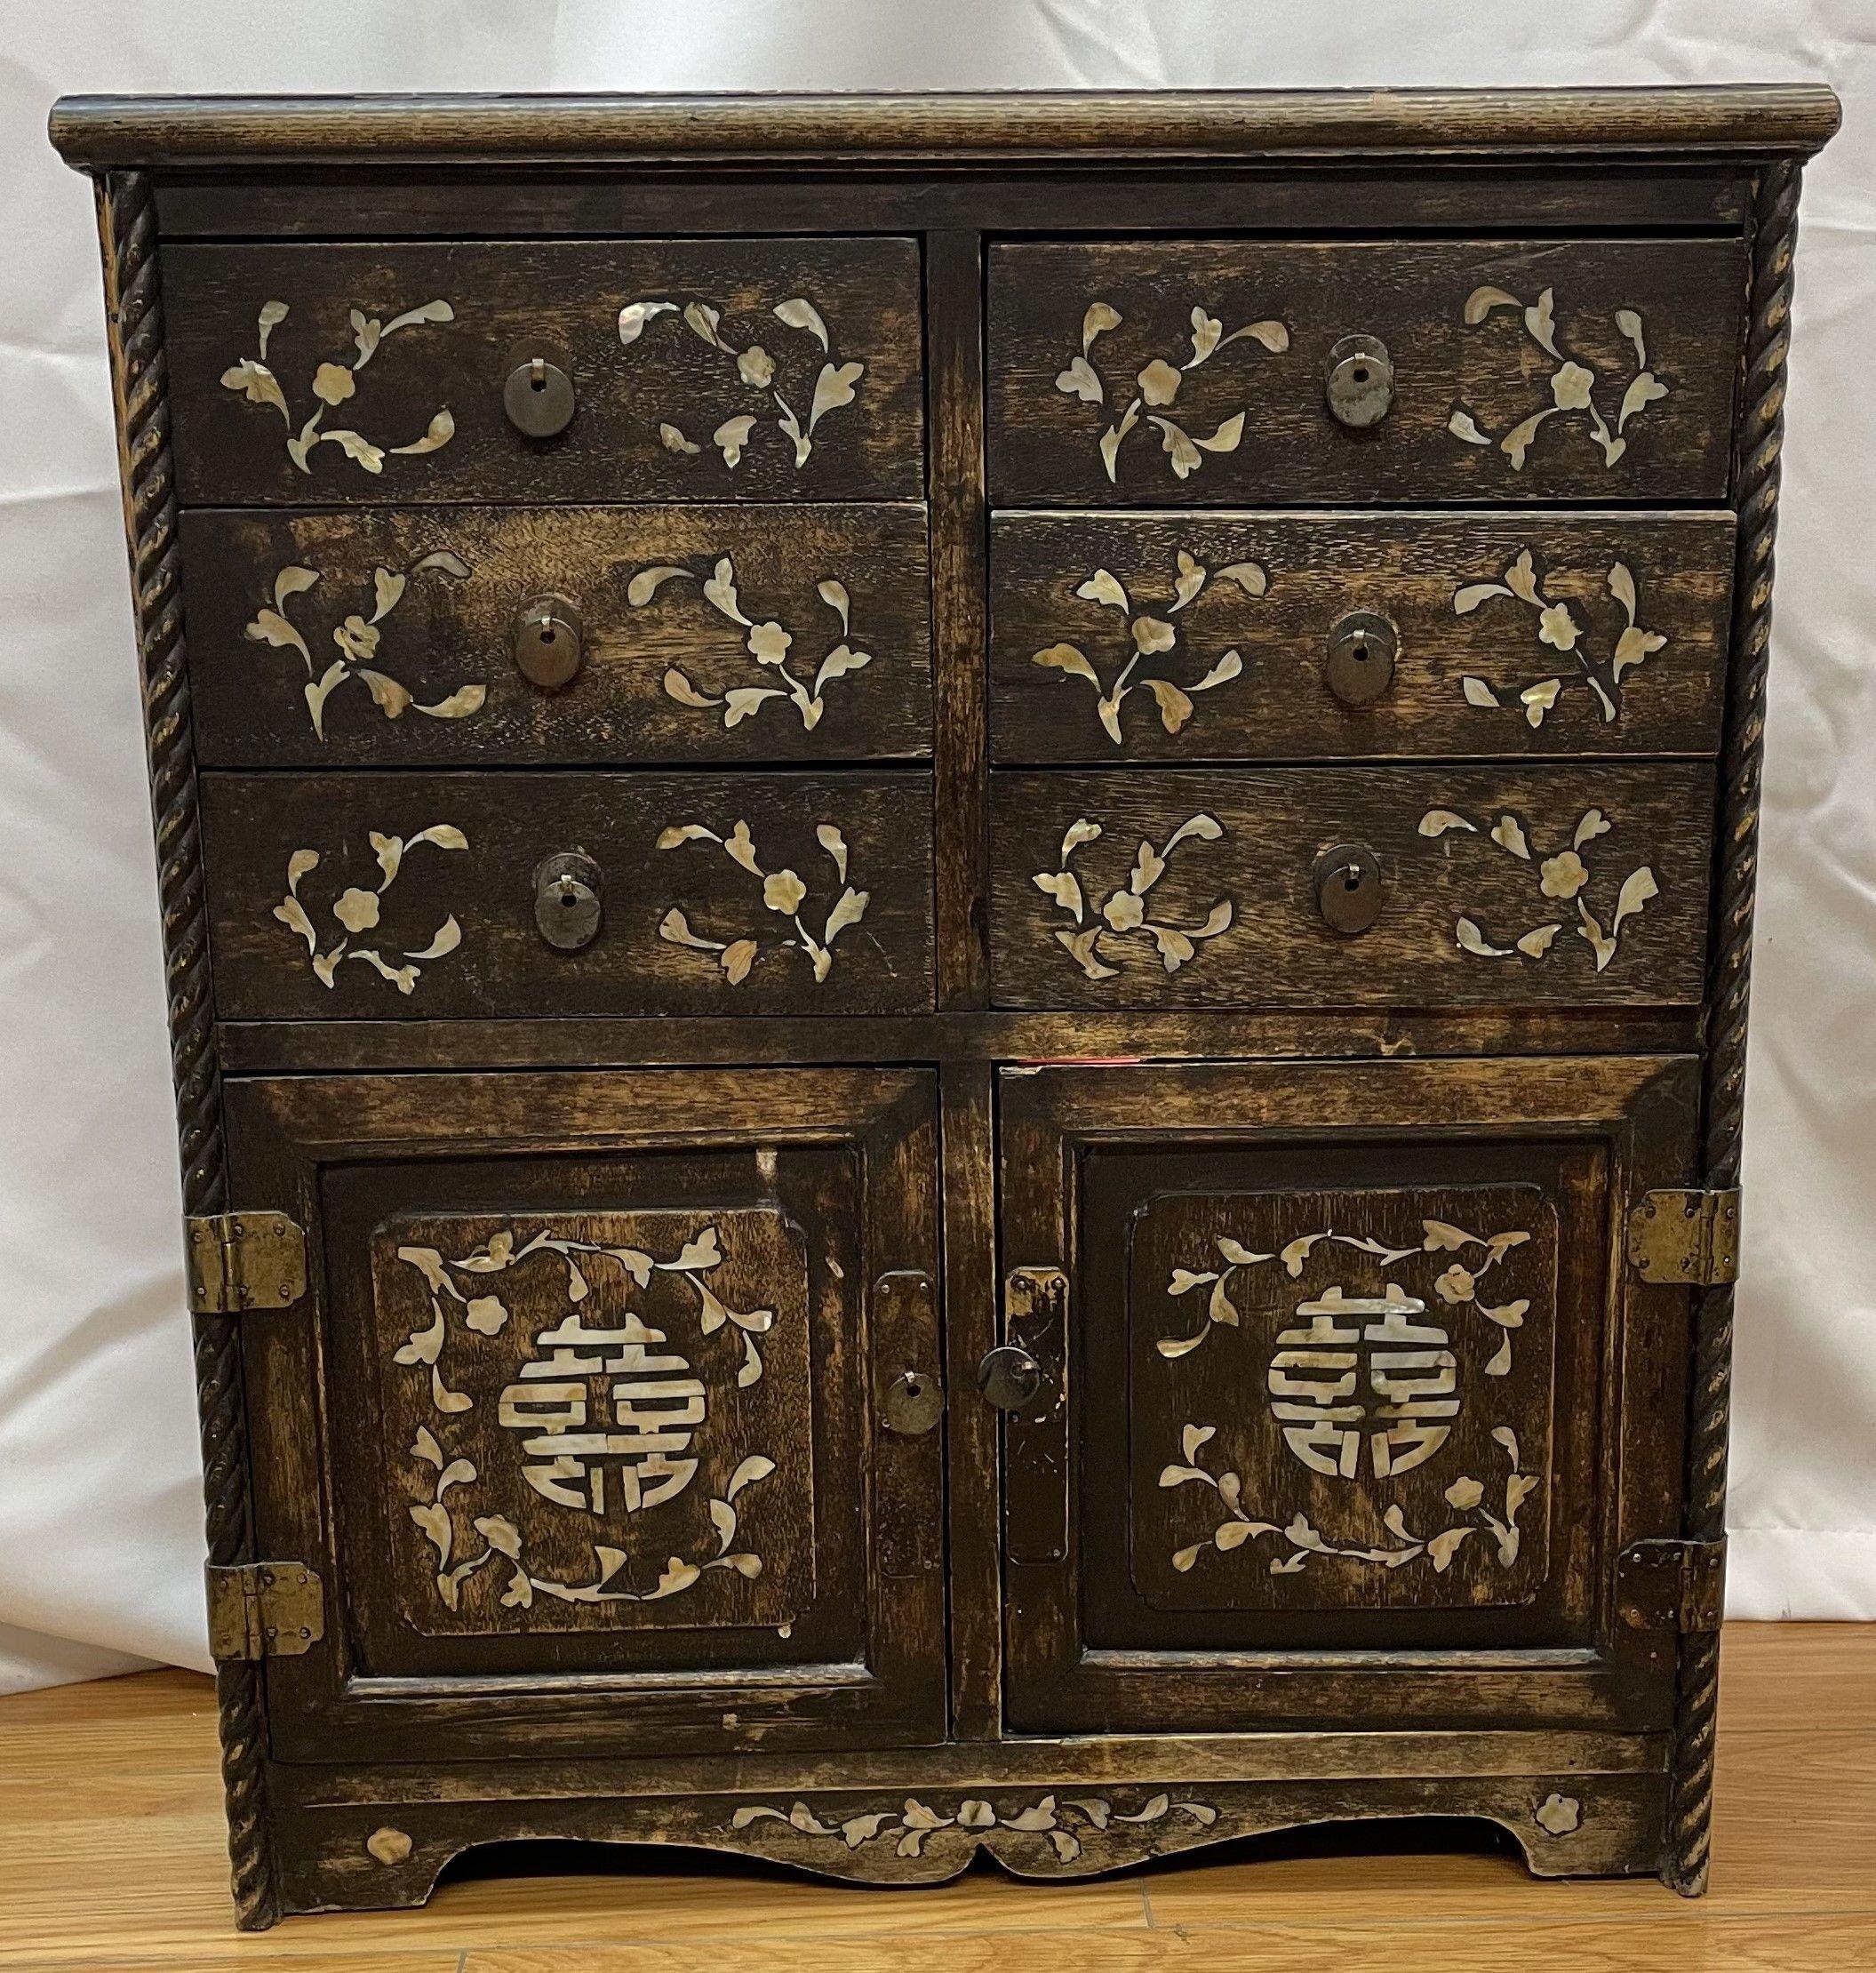 Asian Style 12 drawer cabinet with marble inlaid top and side panels

Late 19th Century 

20 x 8 x 22 